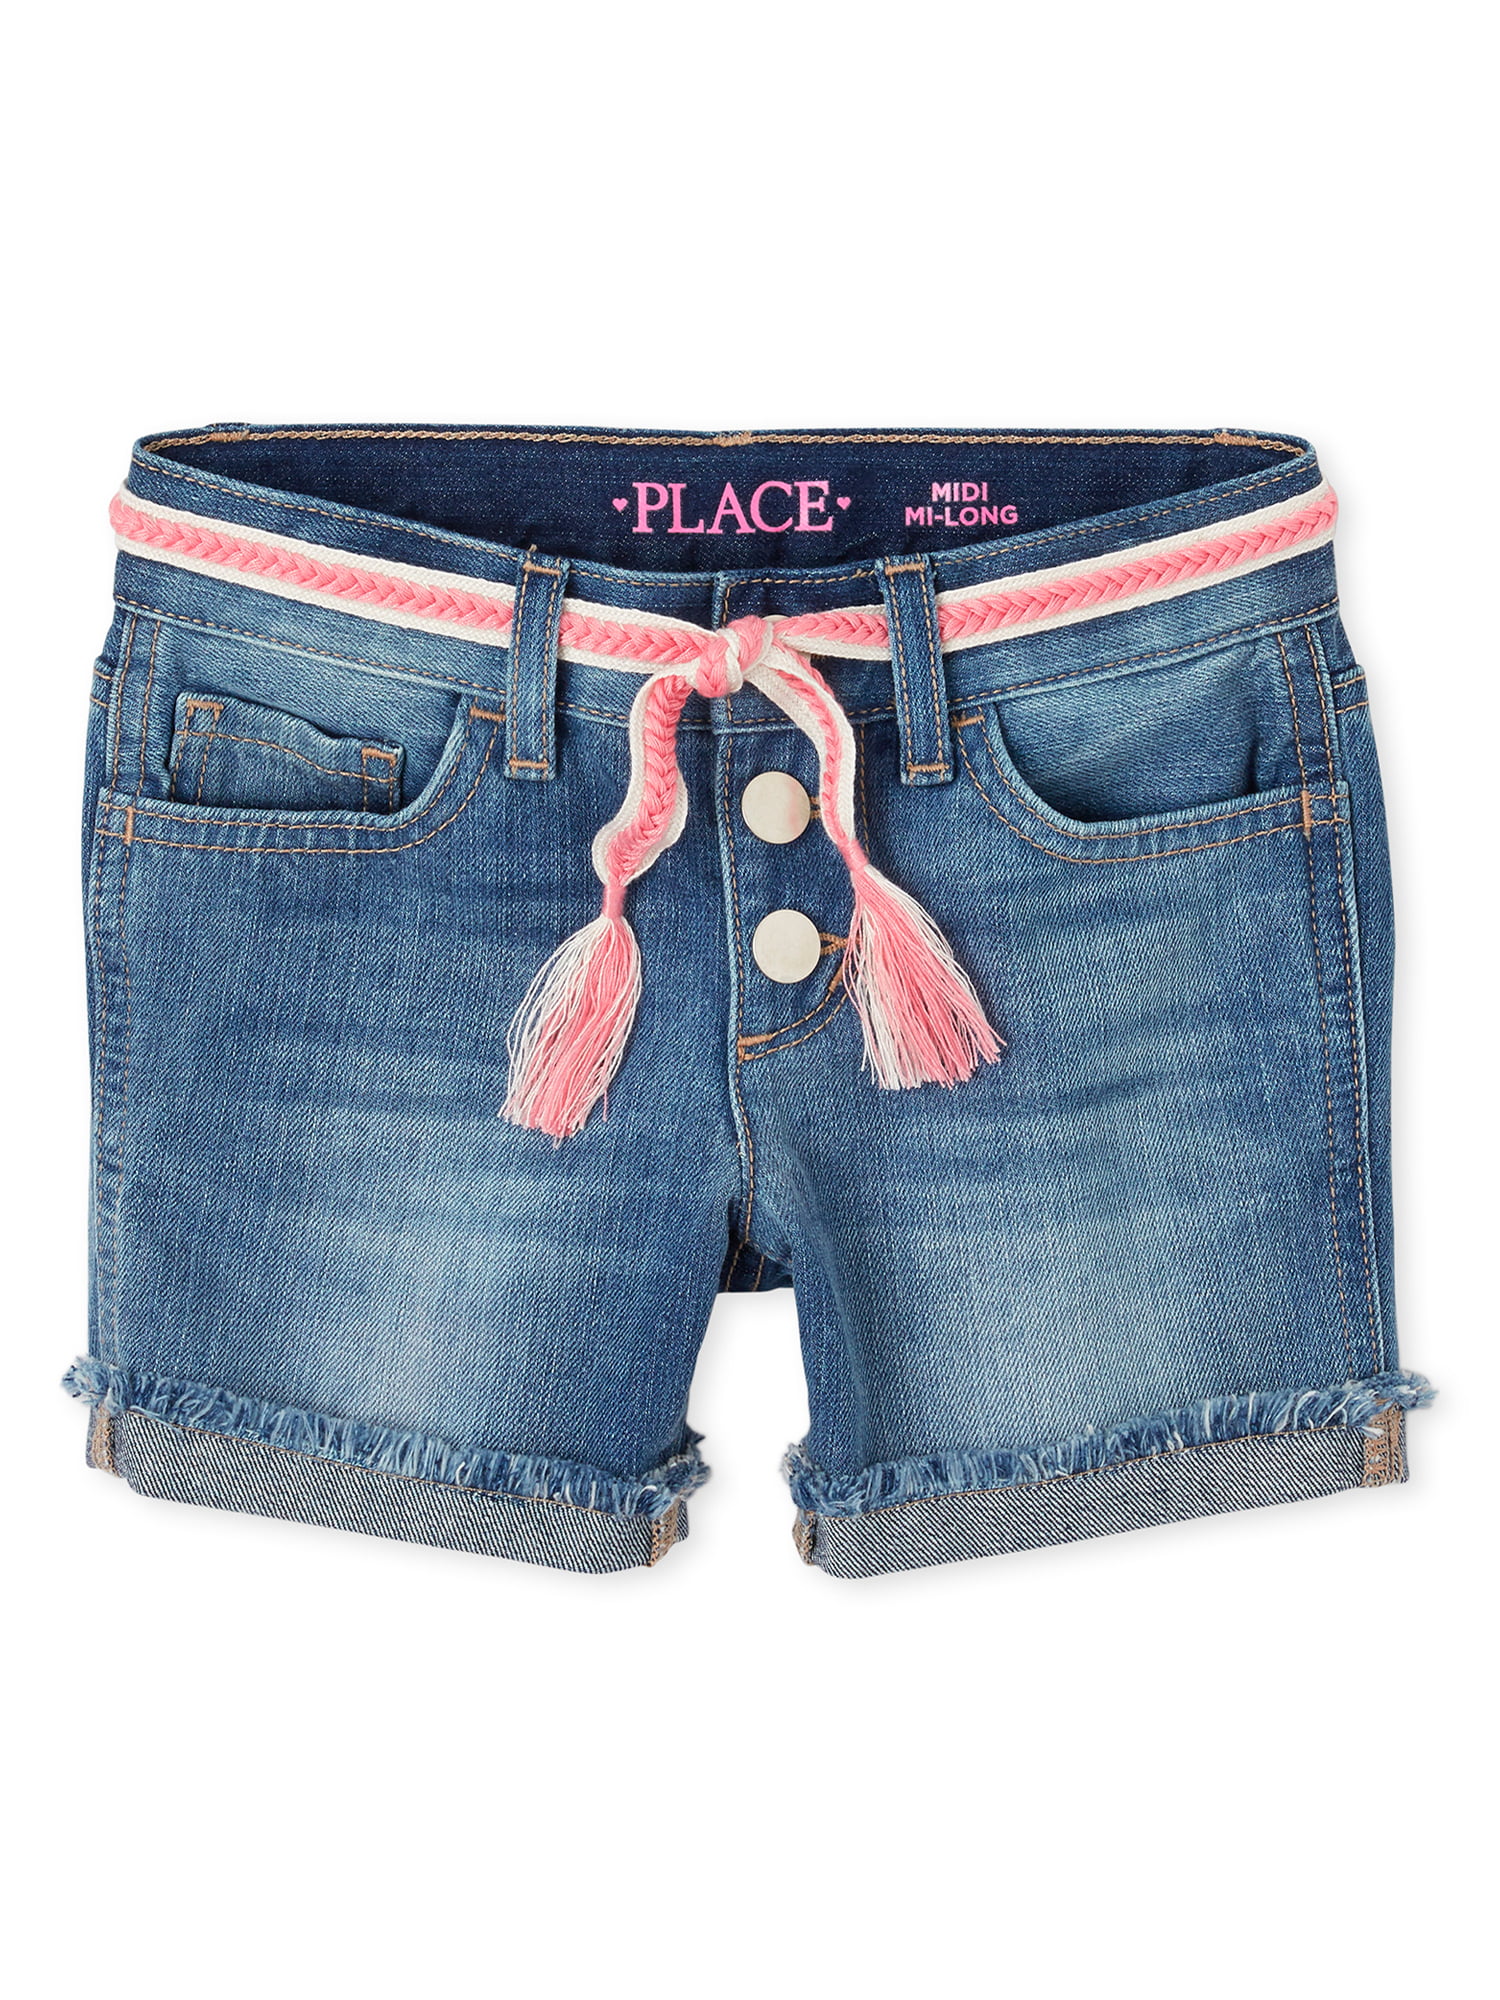 Details about   The Children's Place Girls Youth Cotton Shorts Blue Size Variations NWT NEW 